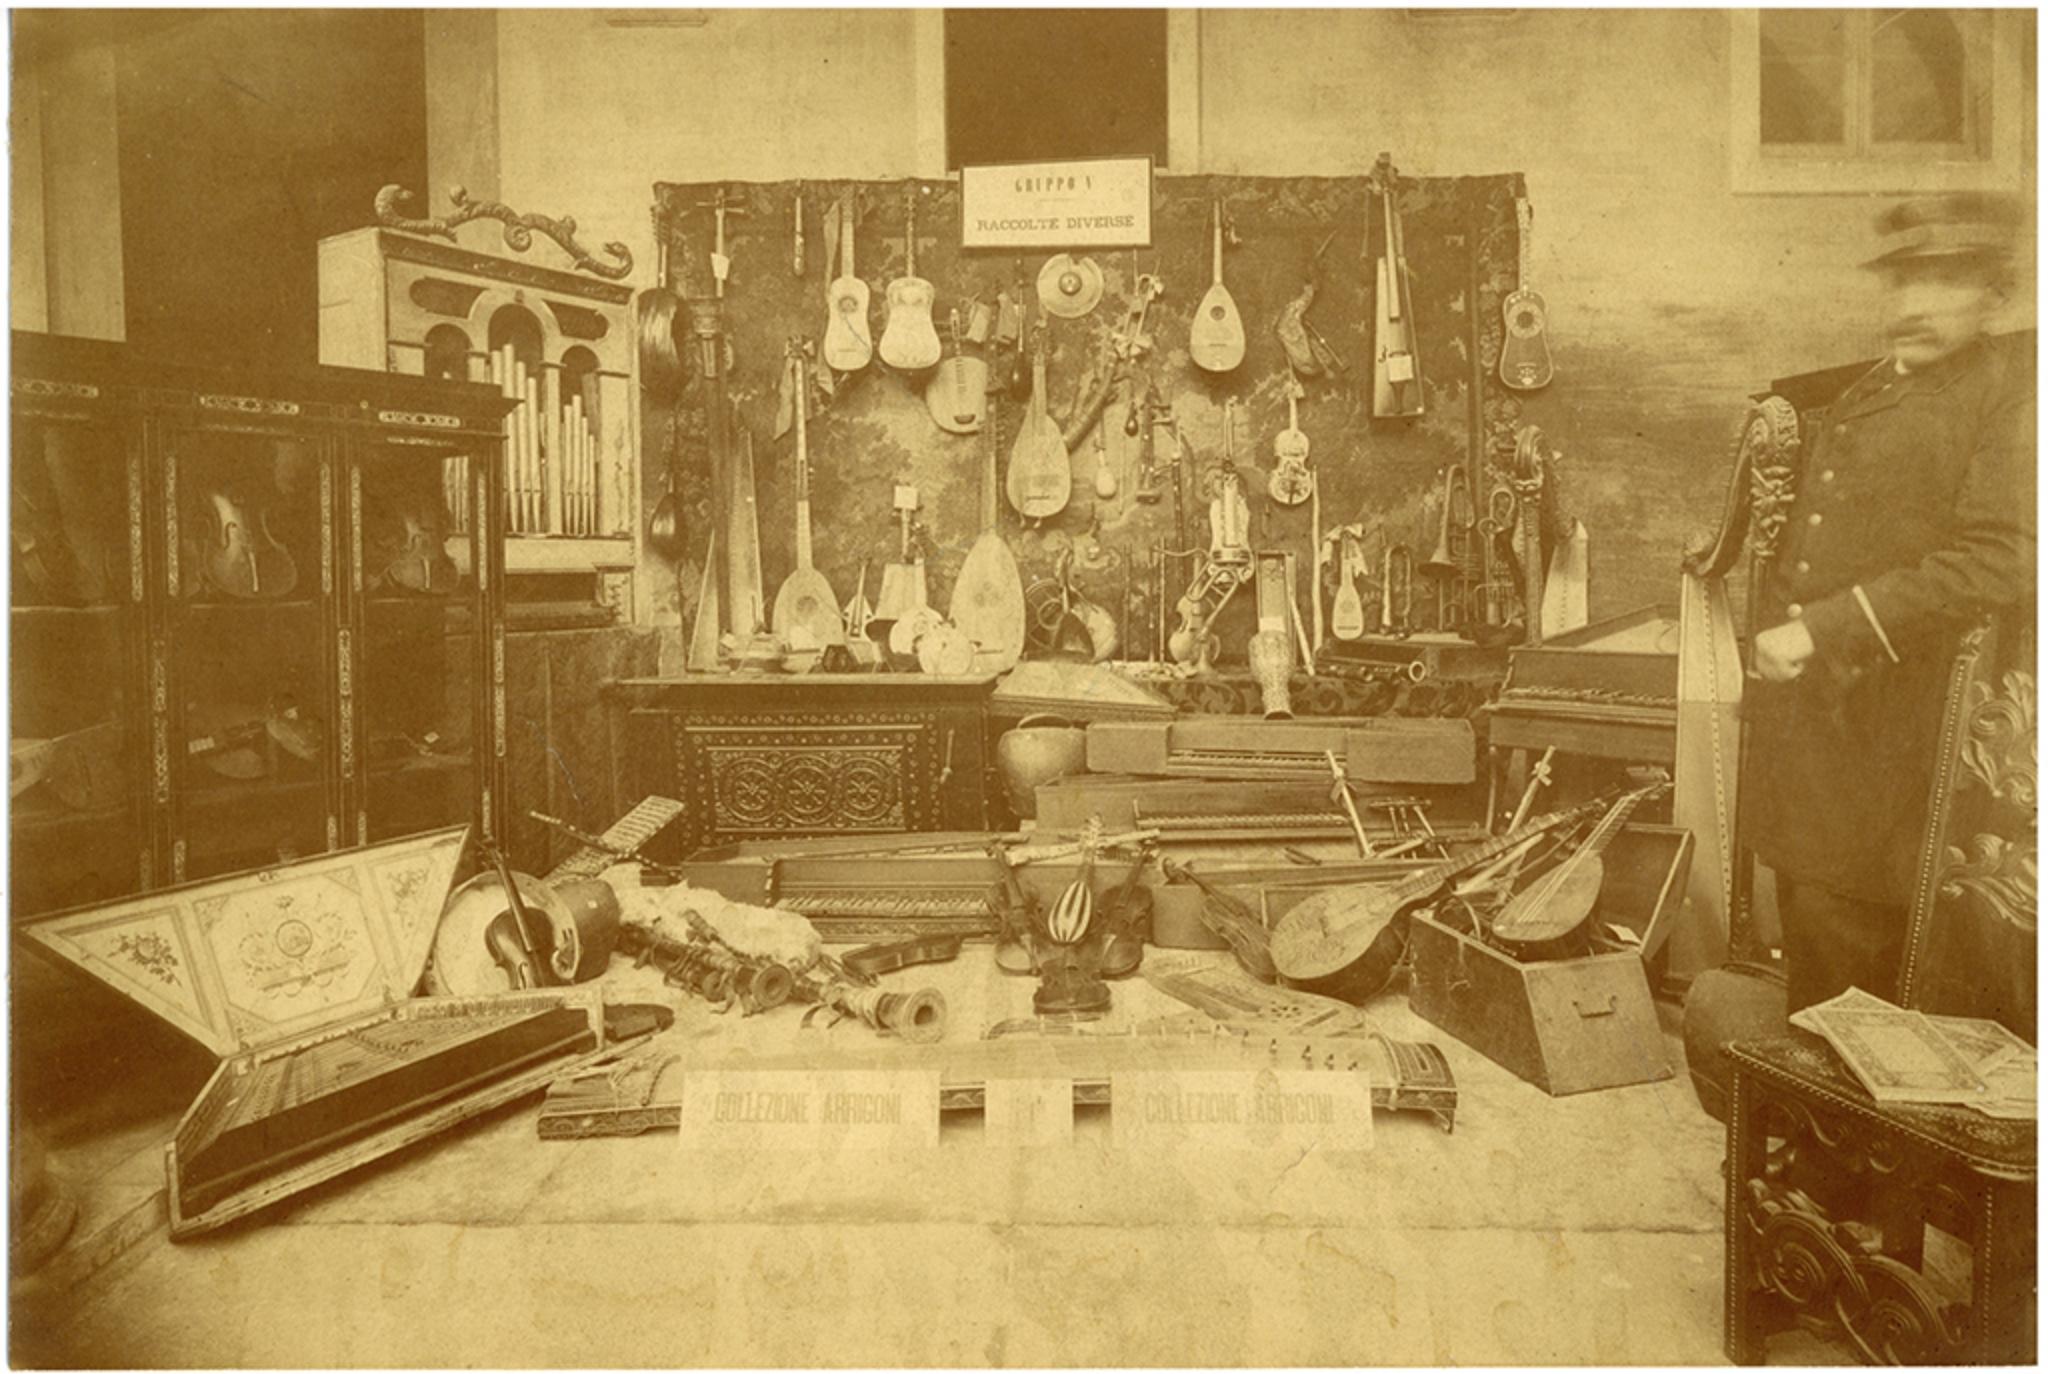 The Arrigoni collection, Esposizione Musicale Milanese - Photographic - 1881